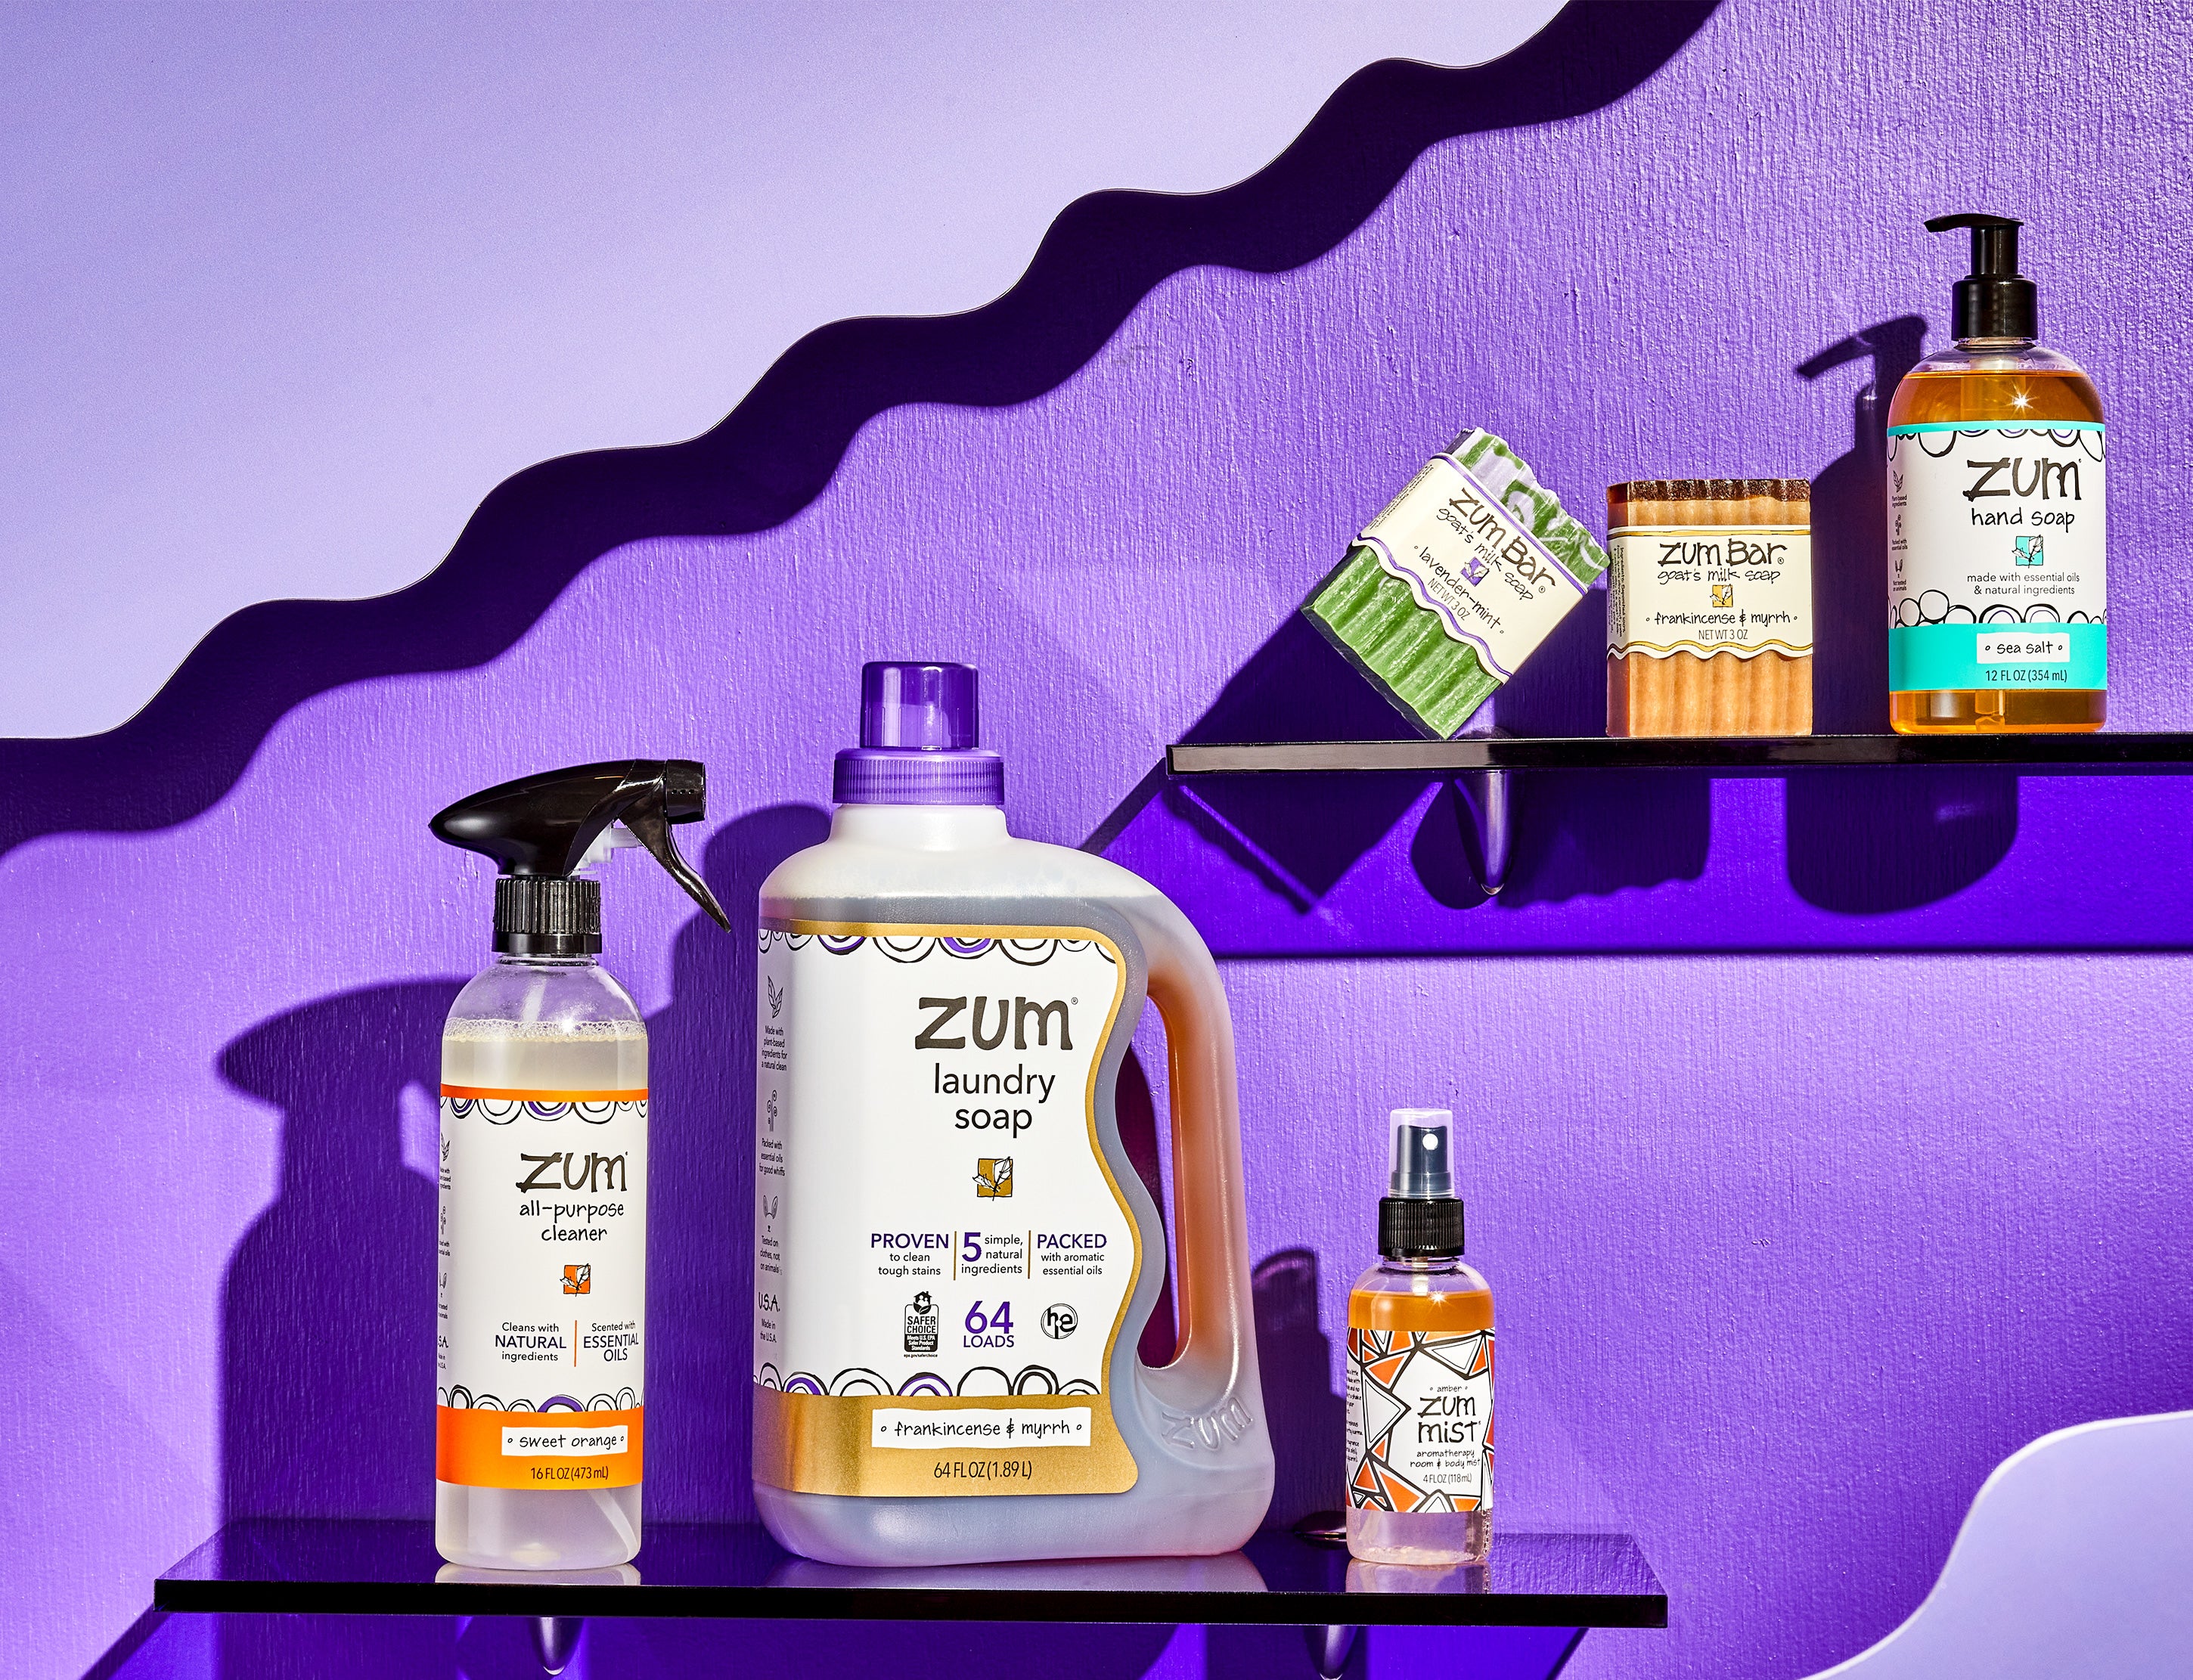 Sweet-Orange All-Purpose Cleaner bottle with a sprayer, Frankincense & Myrrh Laundry Soap bottle, and Amber mist bottle with a sprayer on a purple shelf on the bottom left half of the image. Lavender-Min and Frankincense & Myrrh labeled bar soaps and Sea Salt Hand Soap bottle with a pump on a purple shelf on the top right half of the image. Purple wood background with light purple wavy designs coming from the corners on the top left and bottom right.